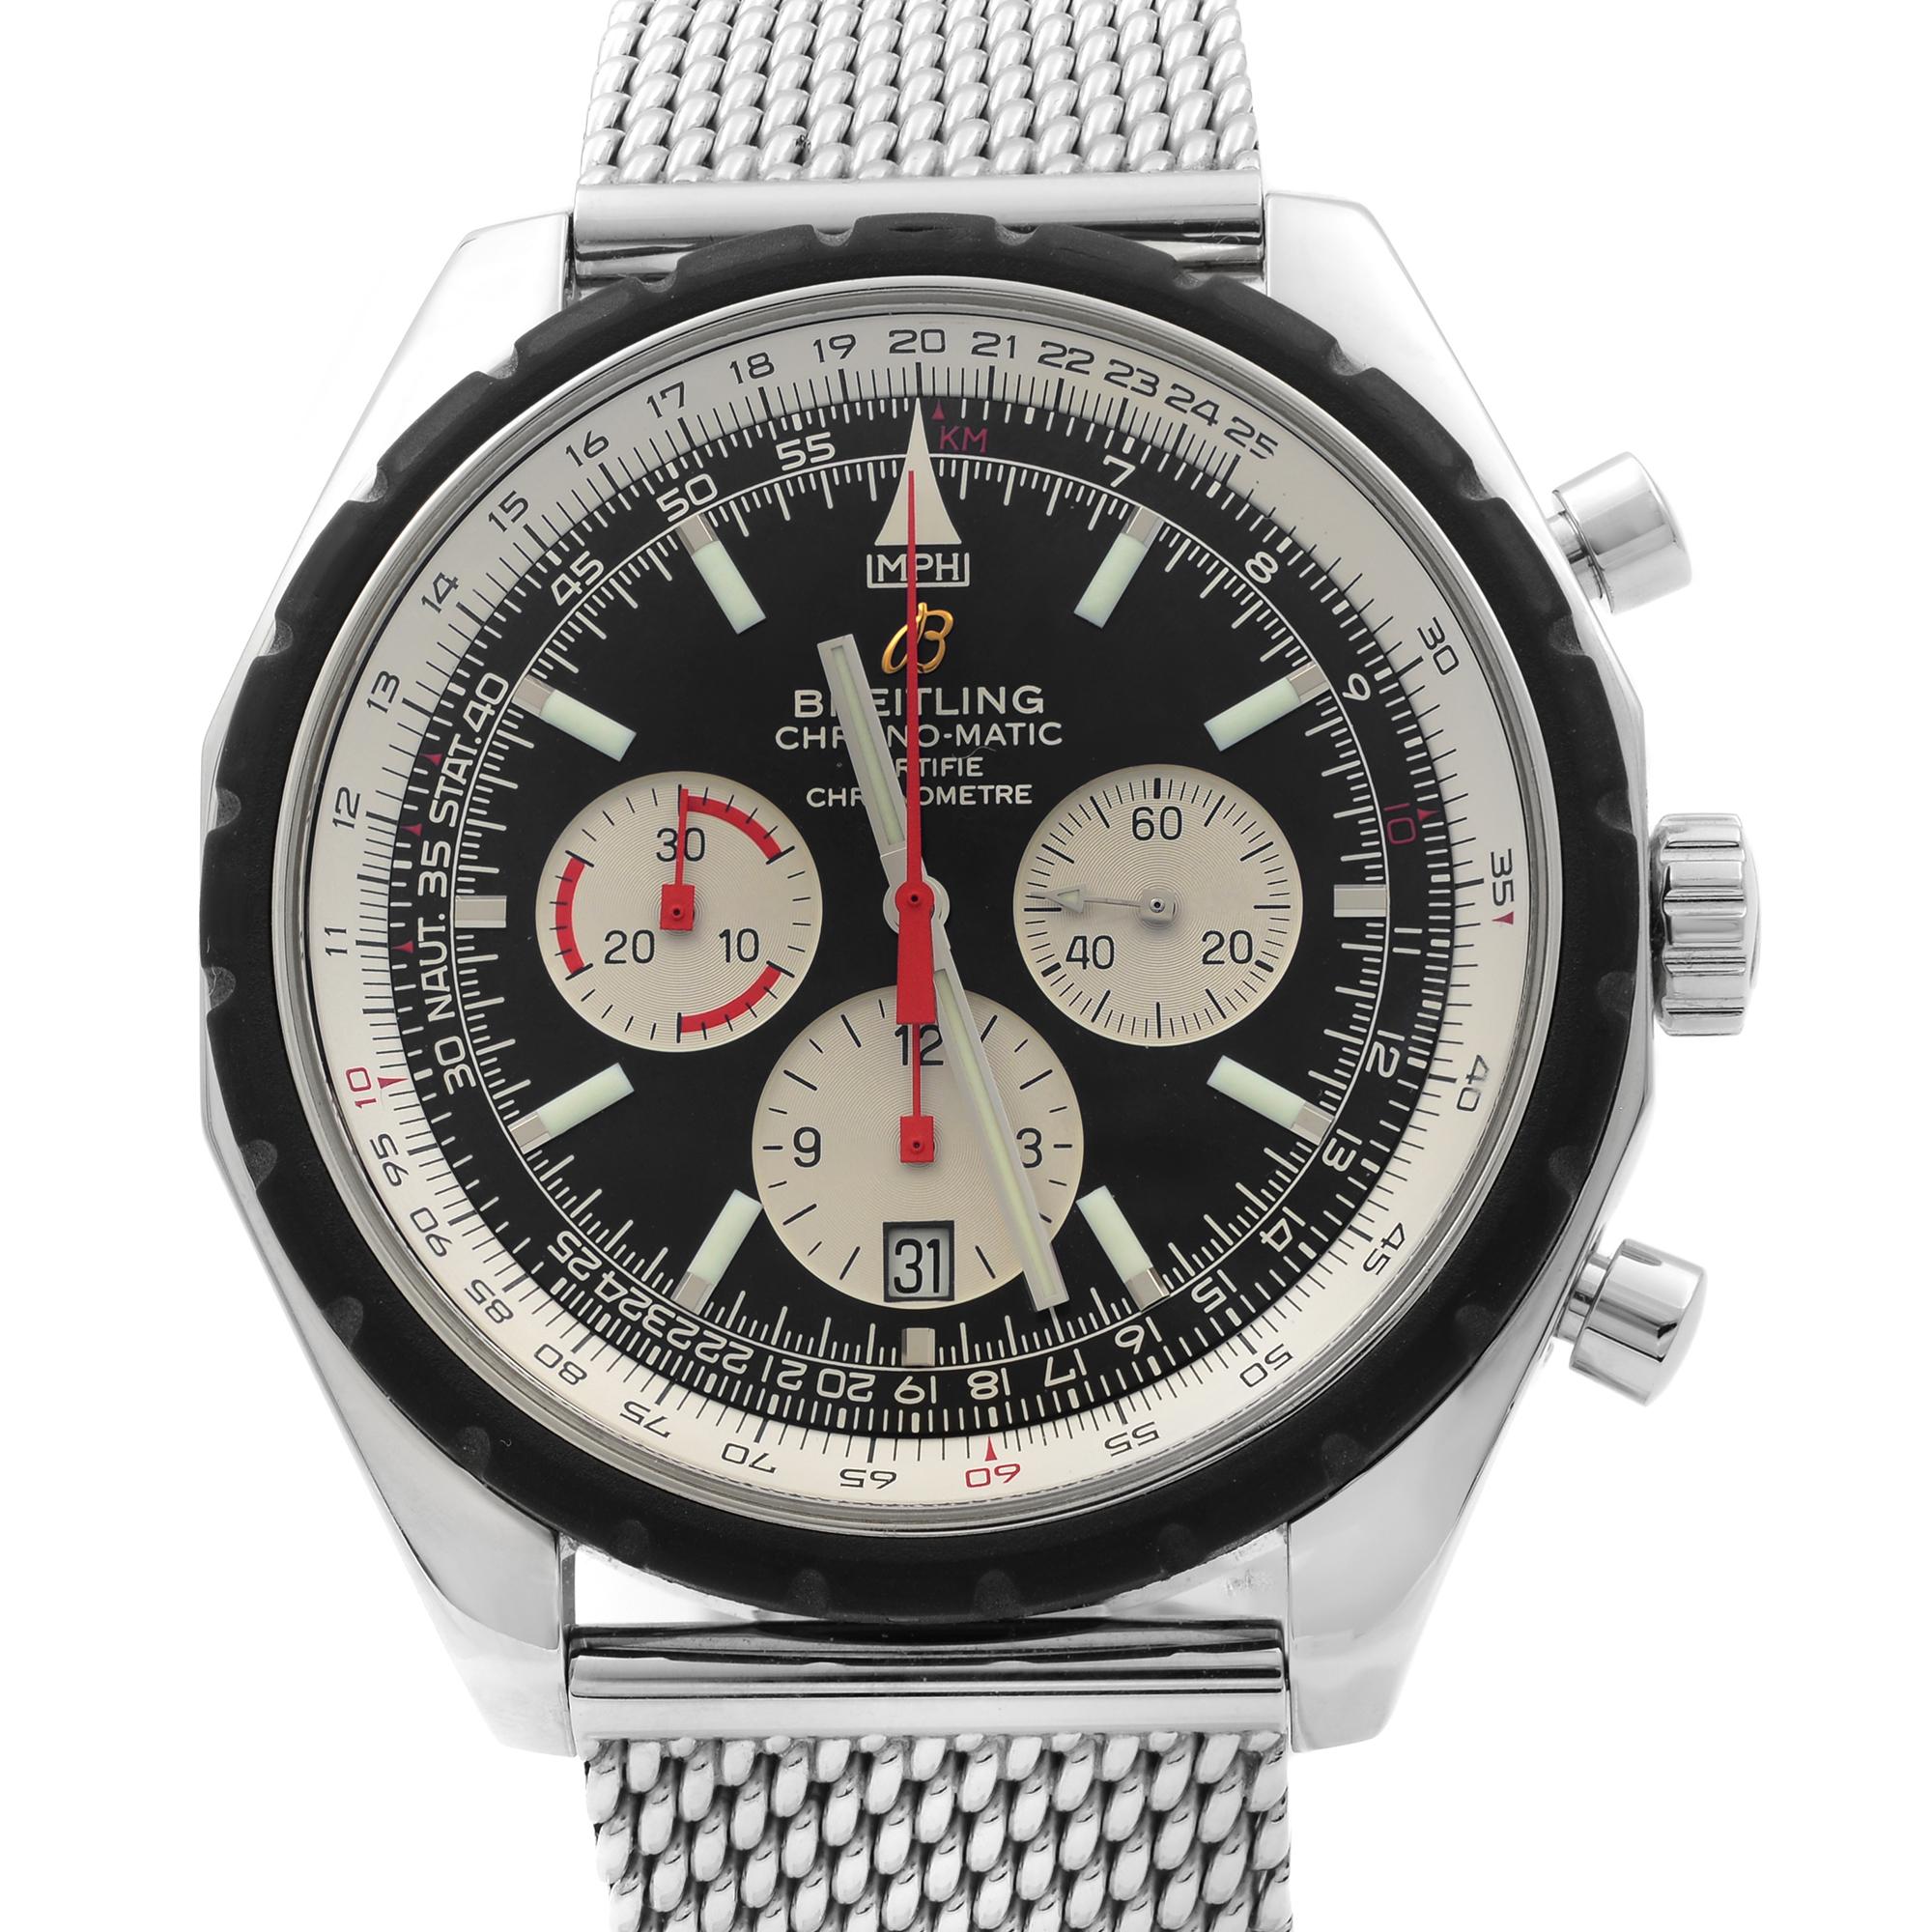 This pre-owned Breitling Chrono-Matic 49 A14360 is a beautiful men's timepiece that is powered by mechanical (automatic) movement which is cased in a stainless steel case. It has a round shape face, chronograph, small seconds subdial, tachymeter